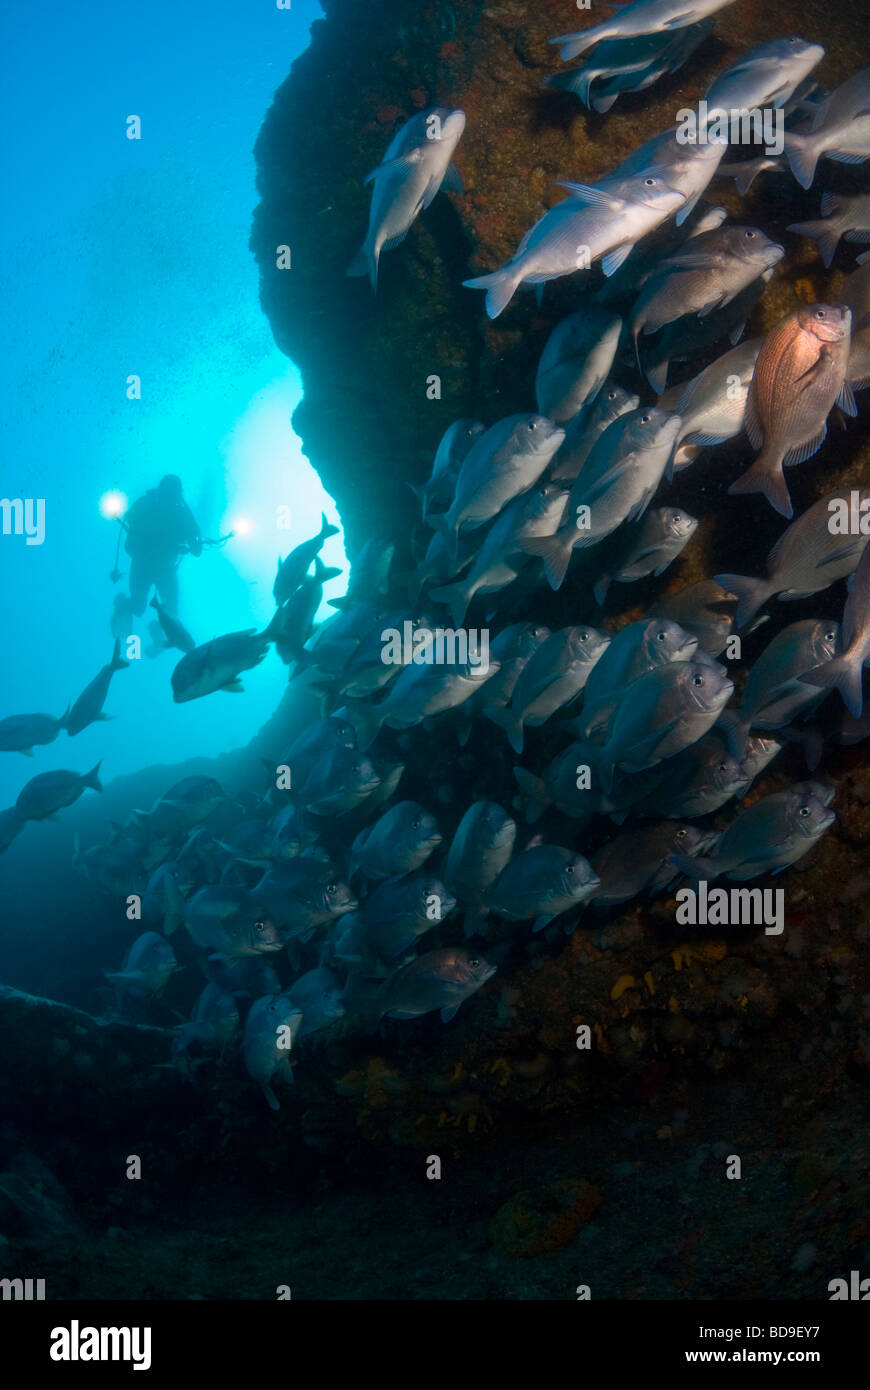 Scuba diver and schooling fish in Aliwal Shoal, South Africa Stock Photo